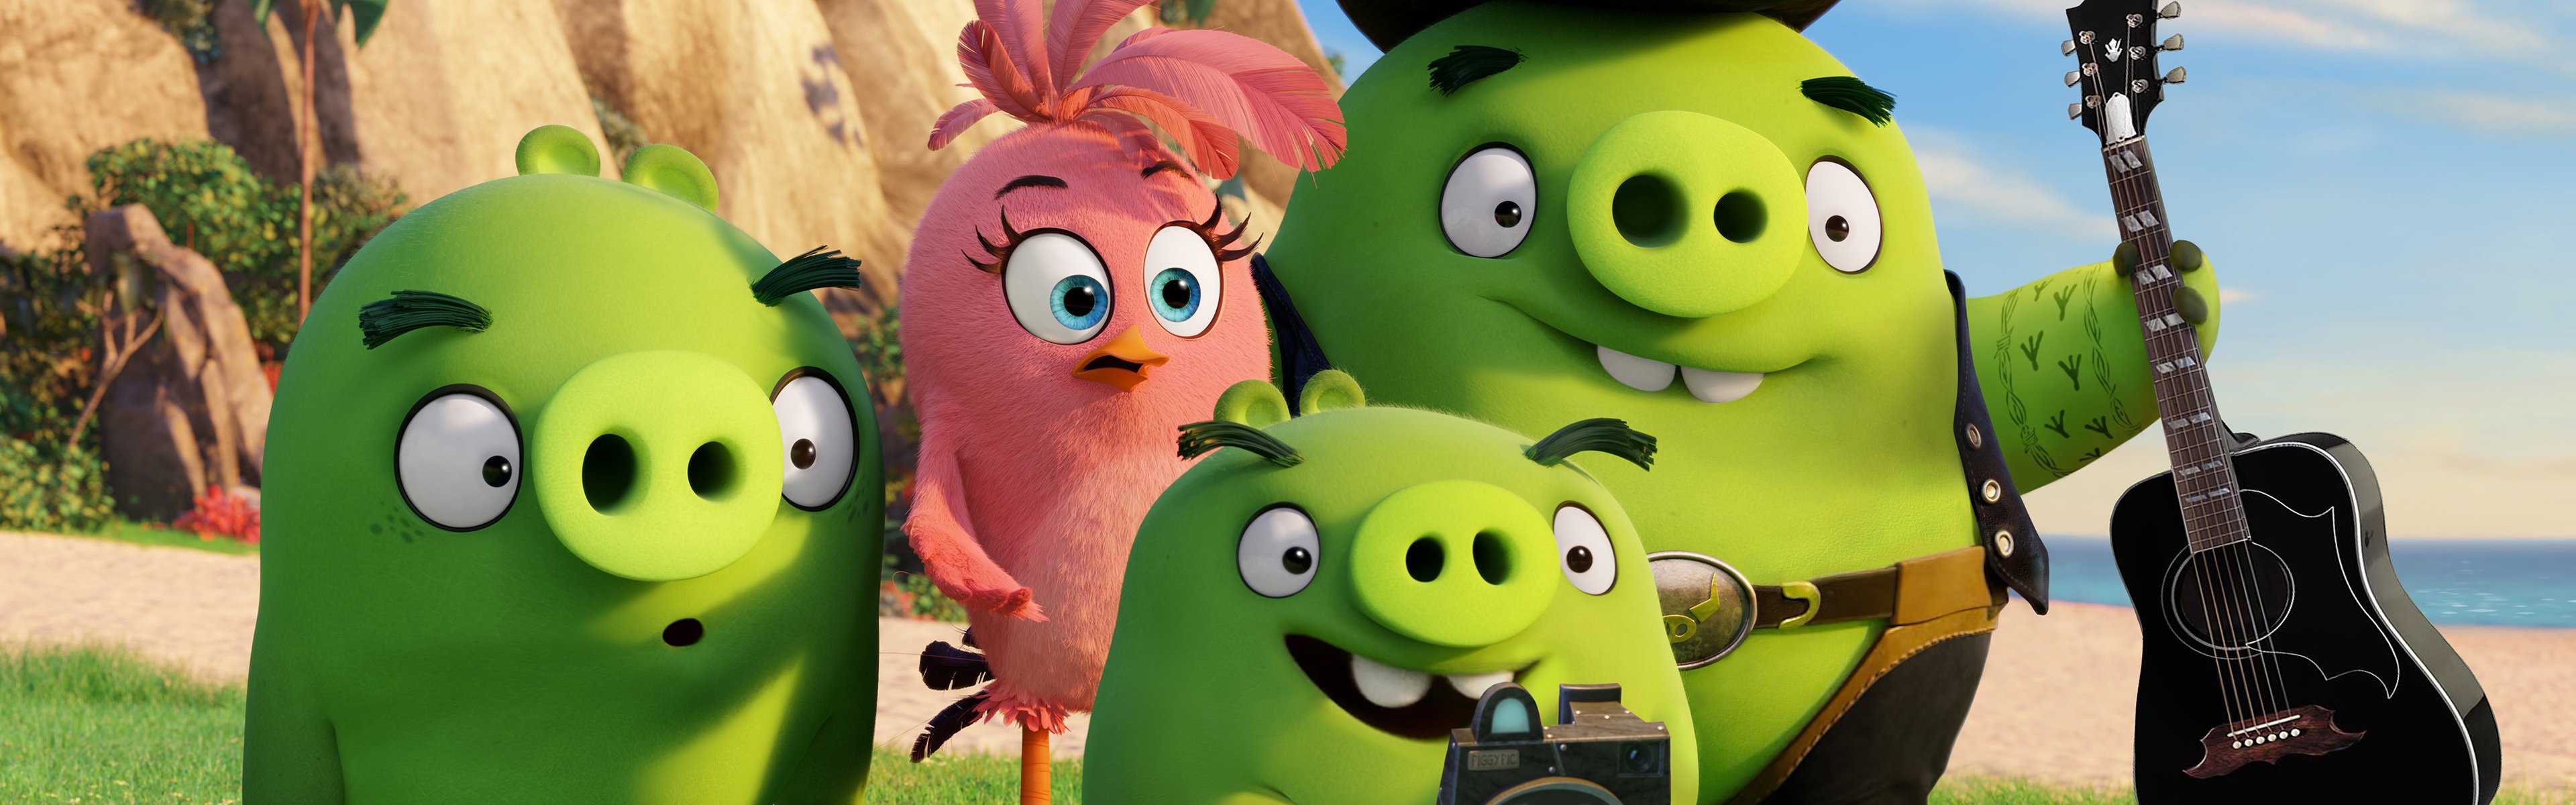 3840x12003840x2160 - Angry Birds Movie 2 , HD Wallpaper & Backgrounds